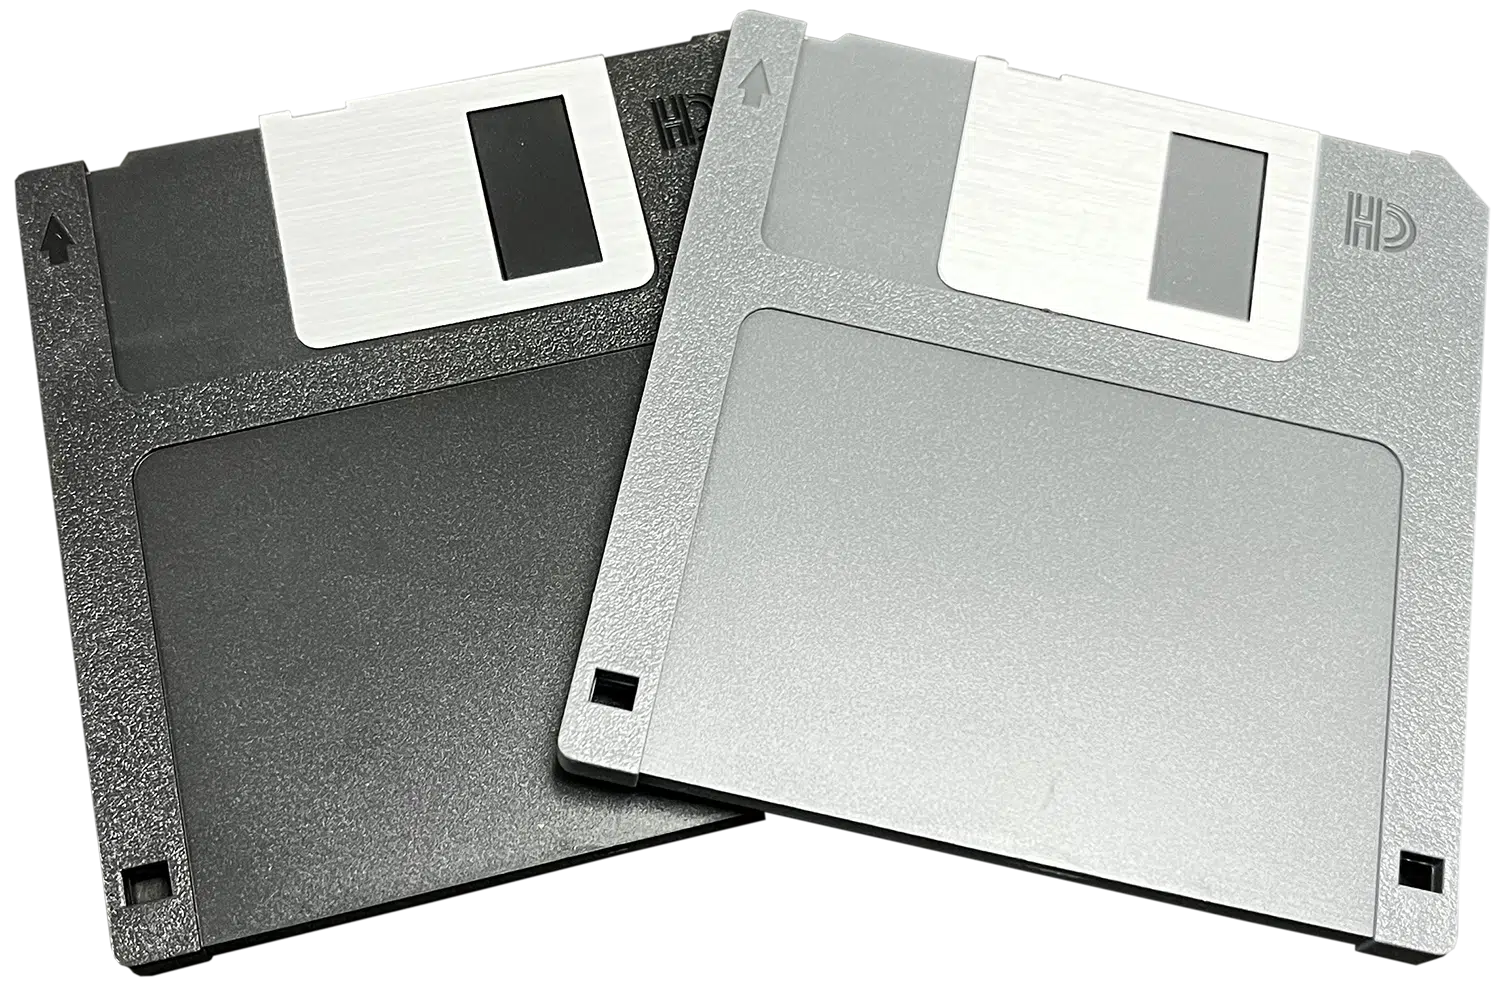 Grey and Black Floppy disk USB Drives